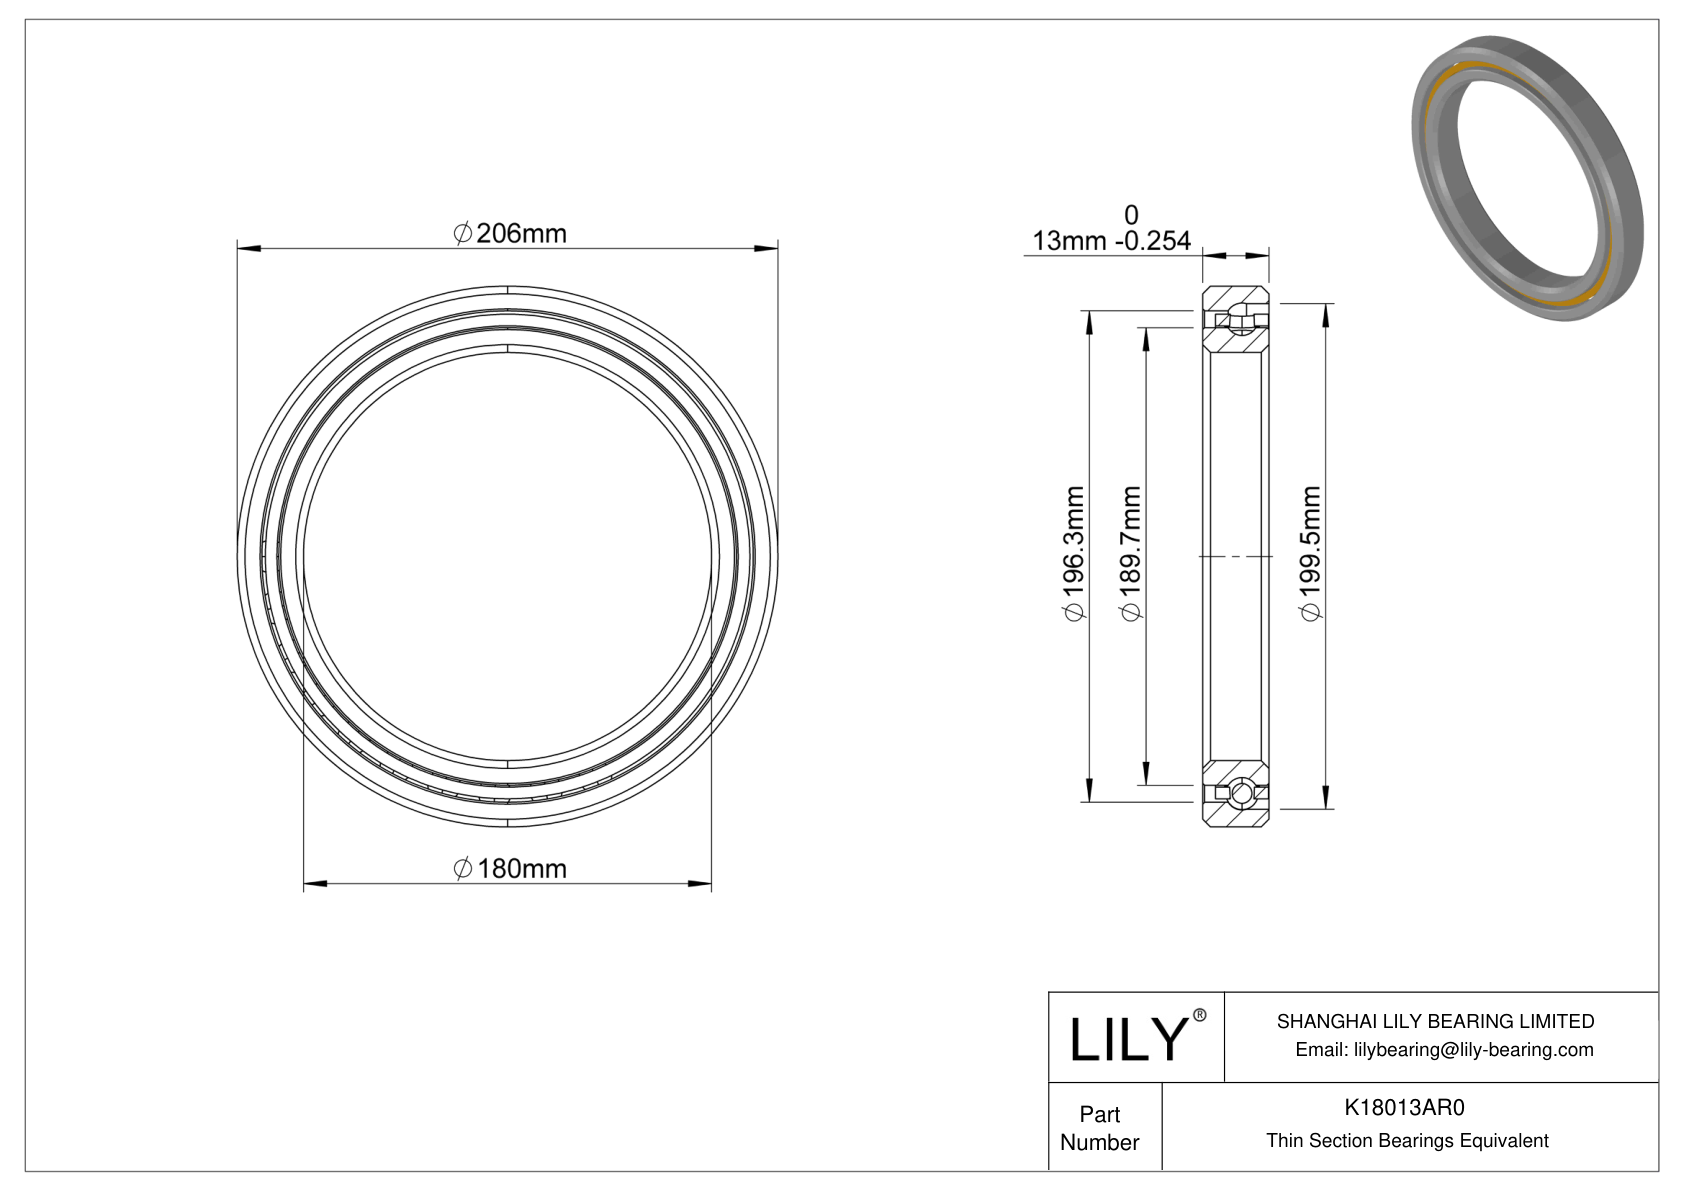 K18013AR0 Constant Section (CS) Bearings cad drawing